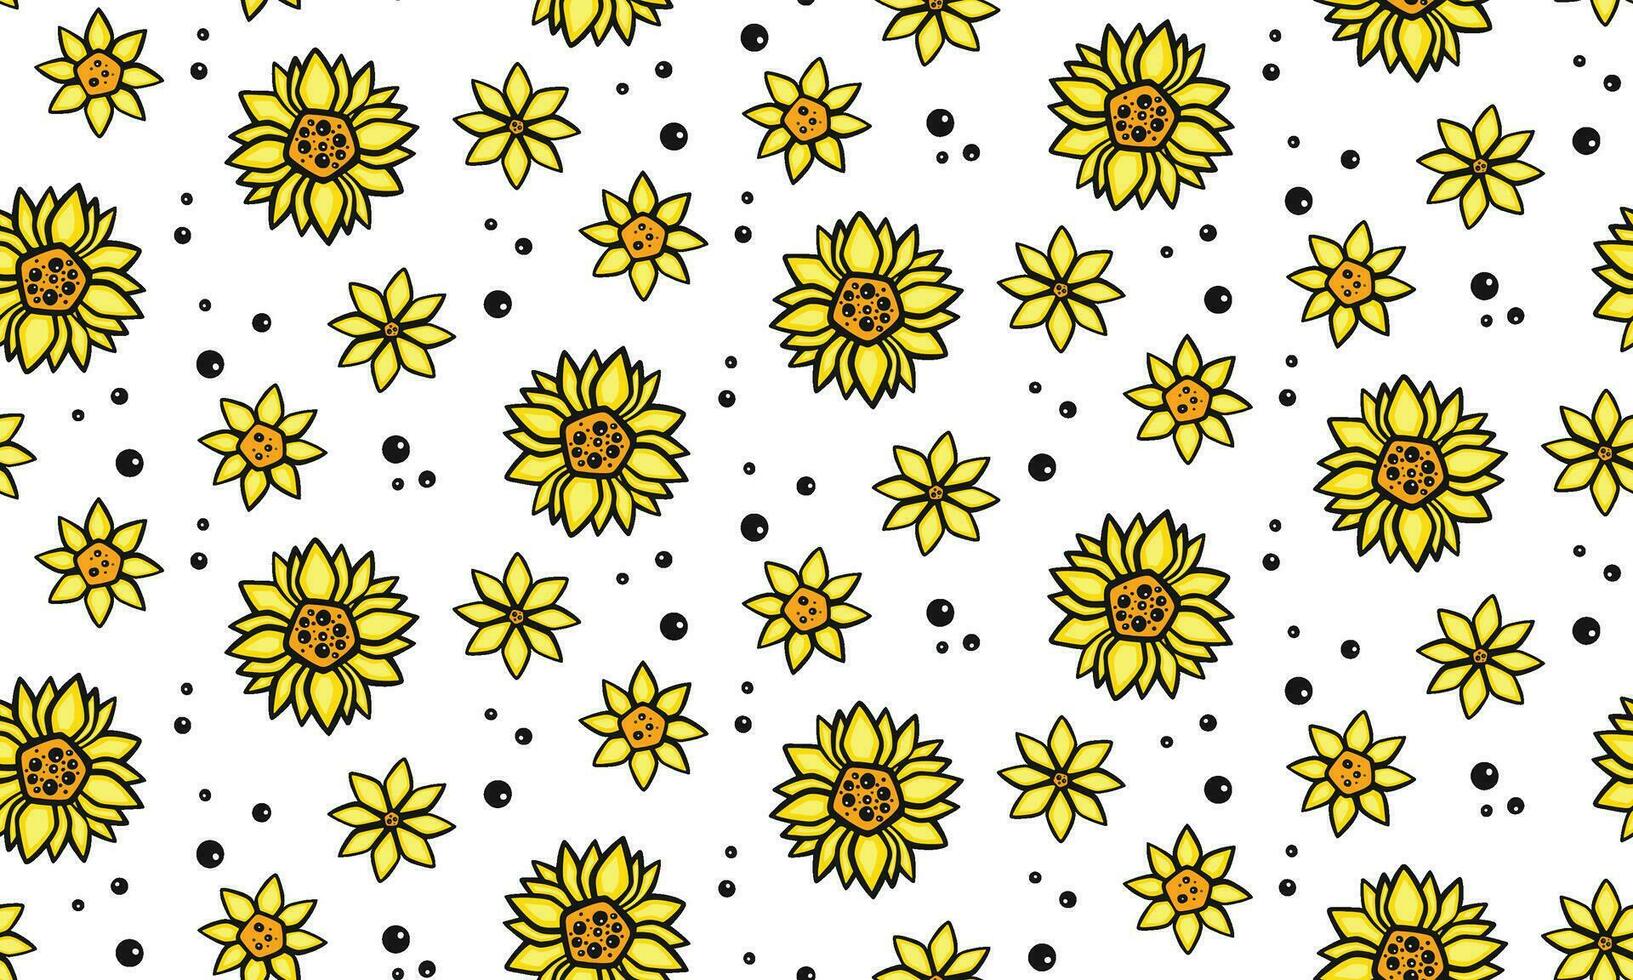 bright pattern with flowers sunflowers, vector illustration